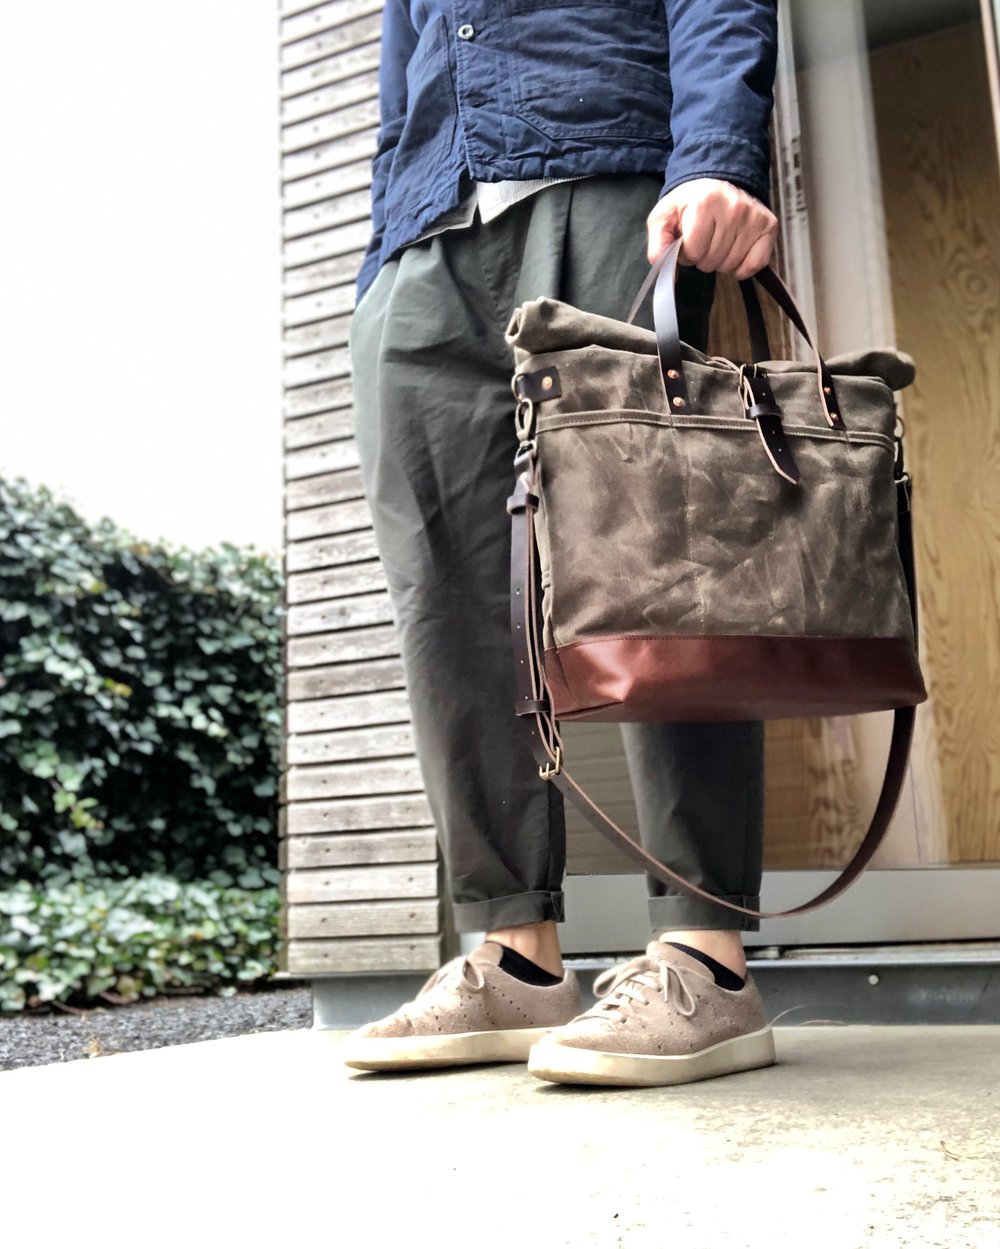 Waxed canvas roll top tote bag / office bag with luggage handle attachment  leather handles and shoul